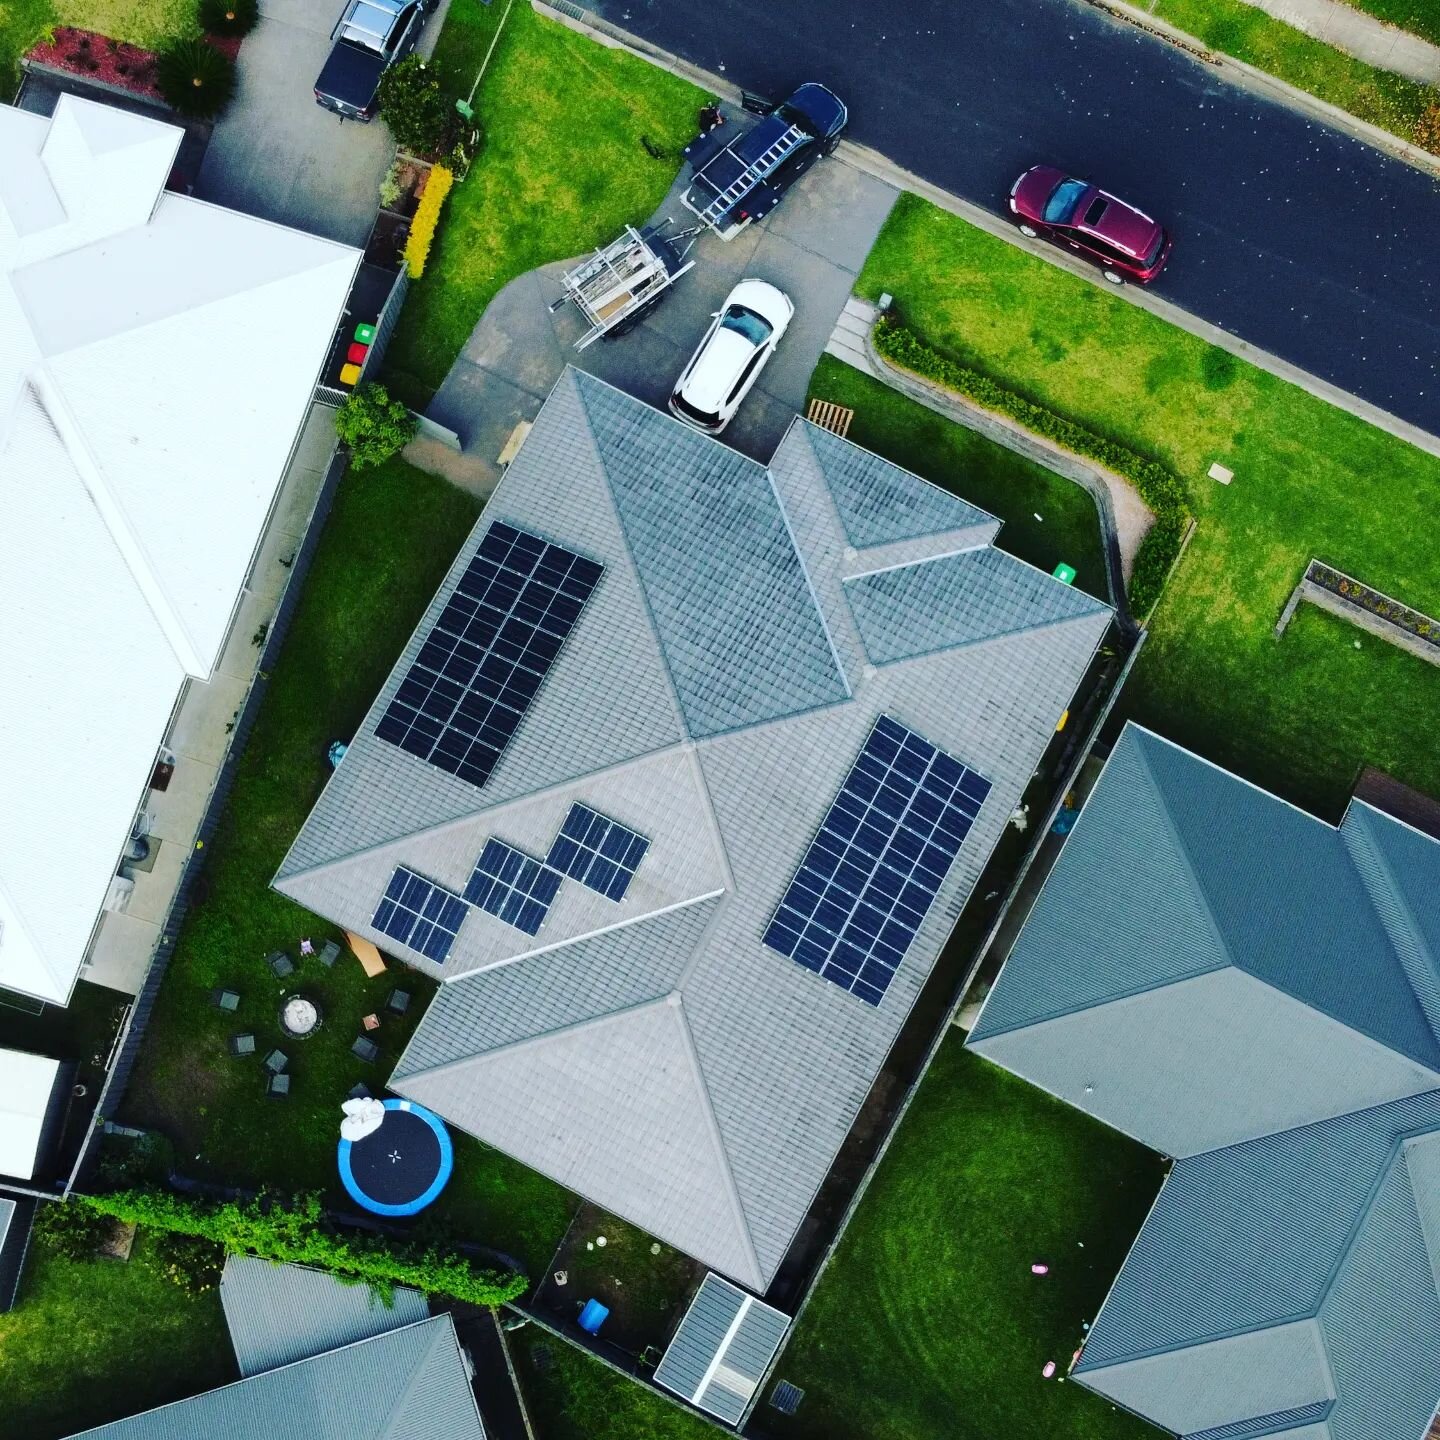 Big Saturday with this 13.2kw solar system